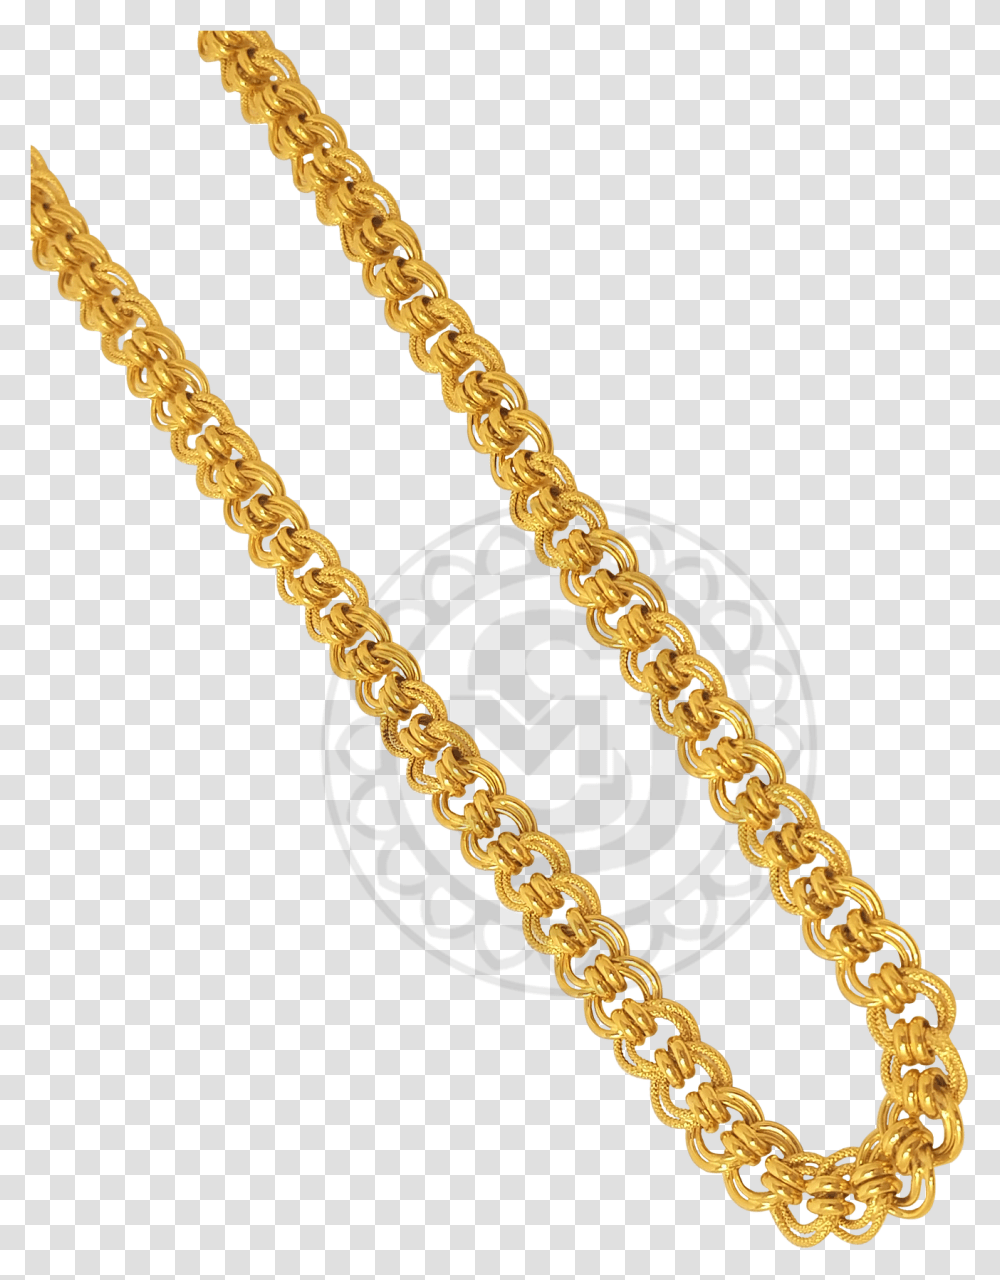 Gold Chains 221236 Chain Full Size Download Seekpng Solid, Bracelet, Jewelry, Accessories, Accessory Transparent Png